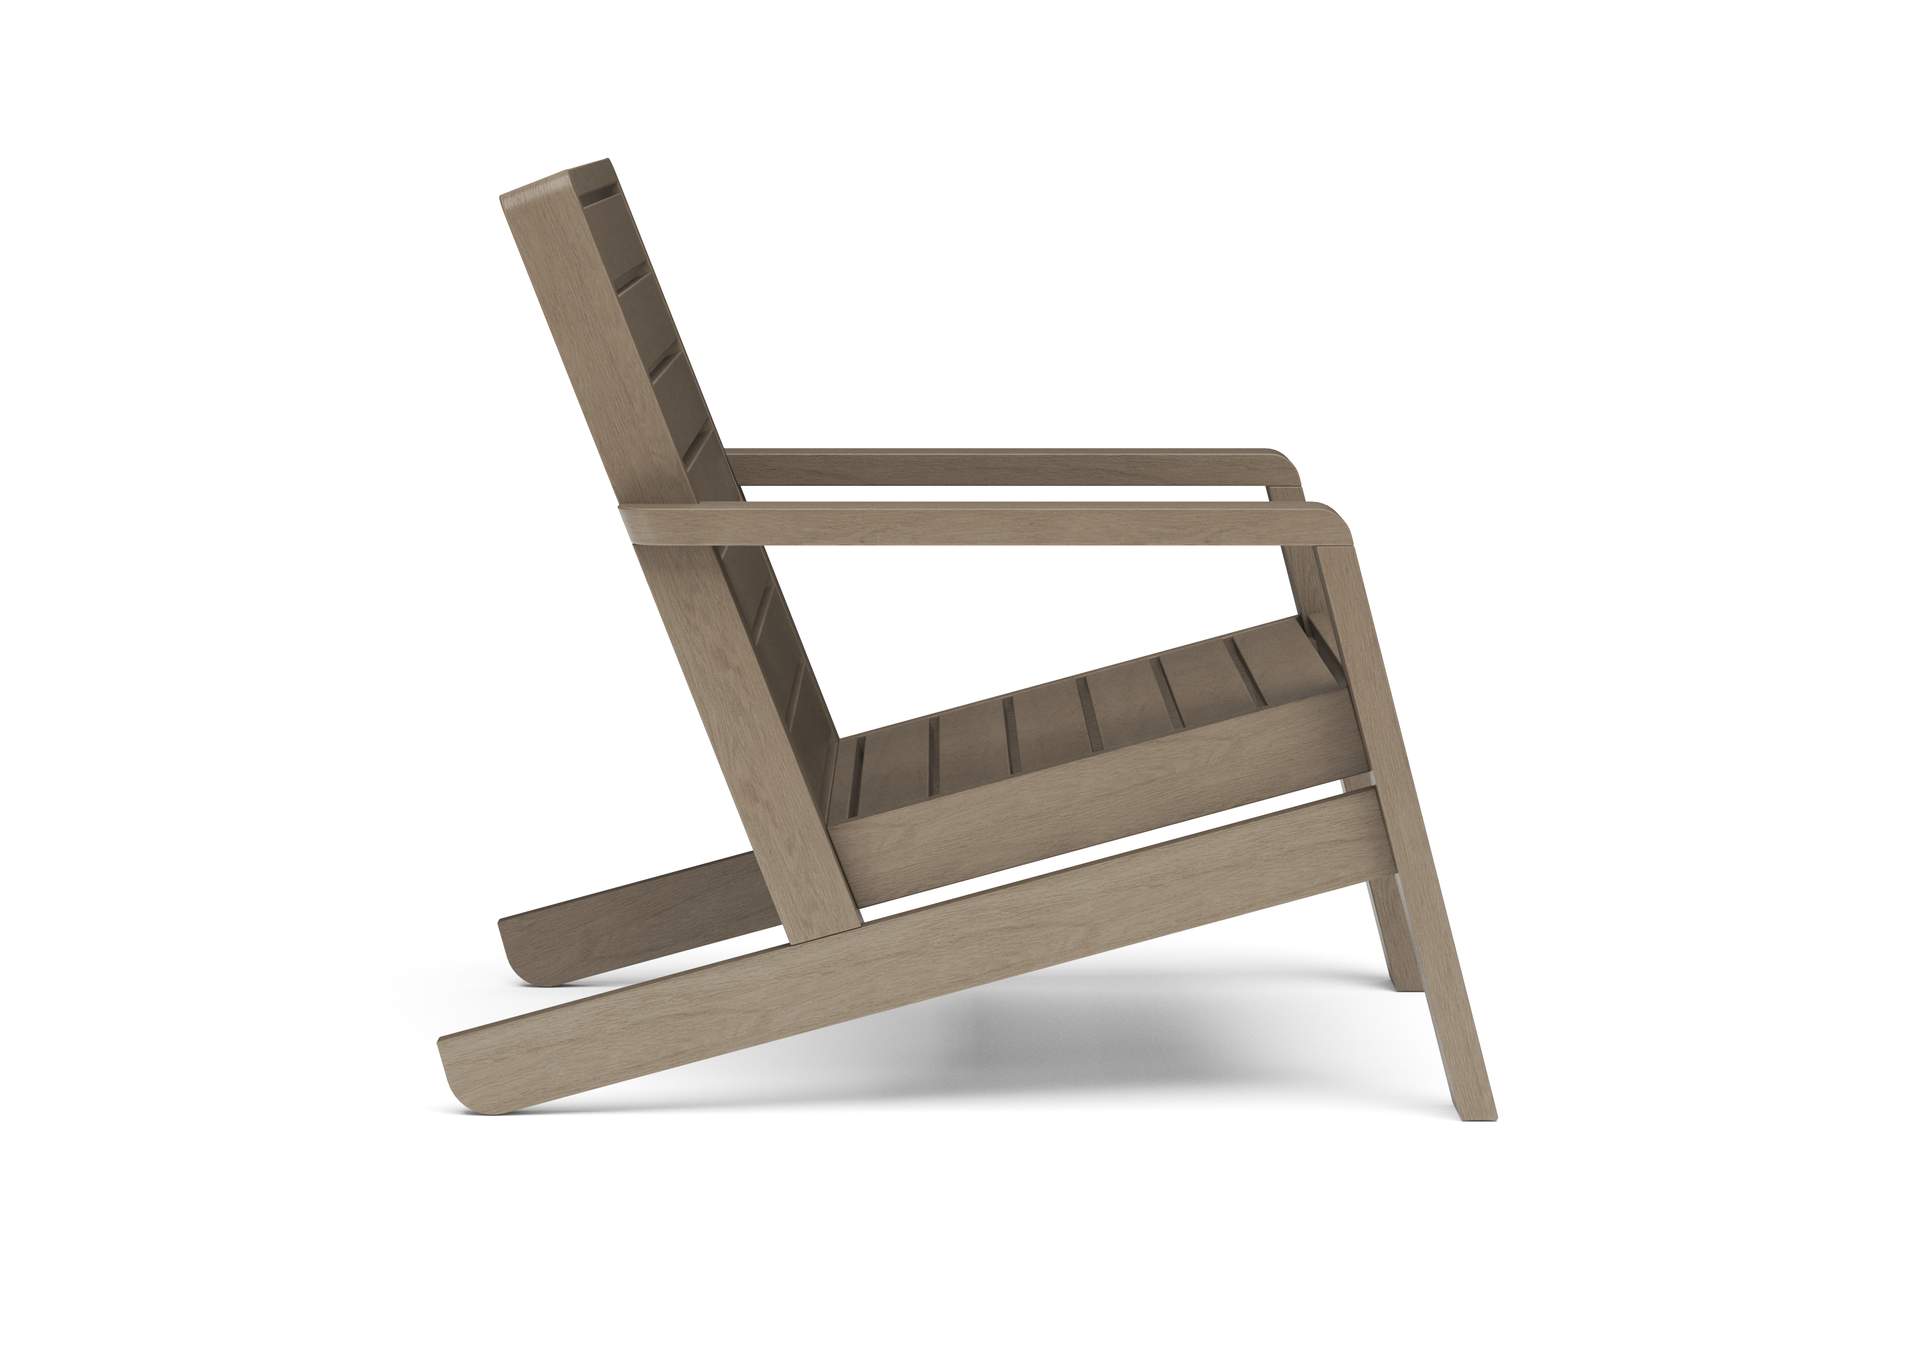 Sustain Outdoor Lounge Chair By Homestyles,Homestyles